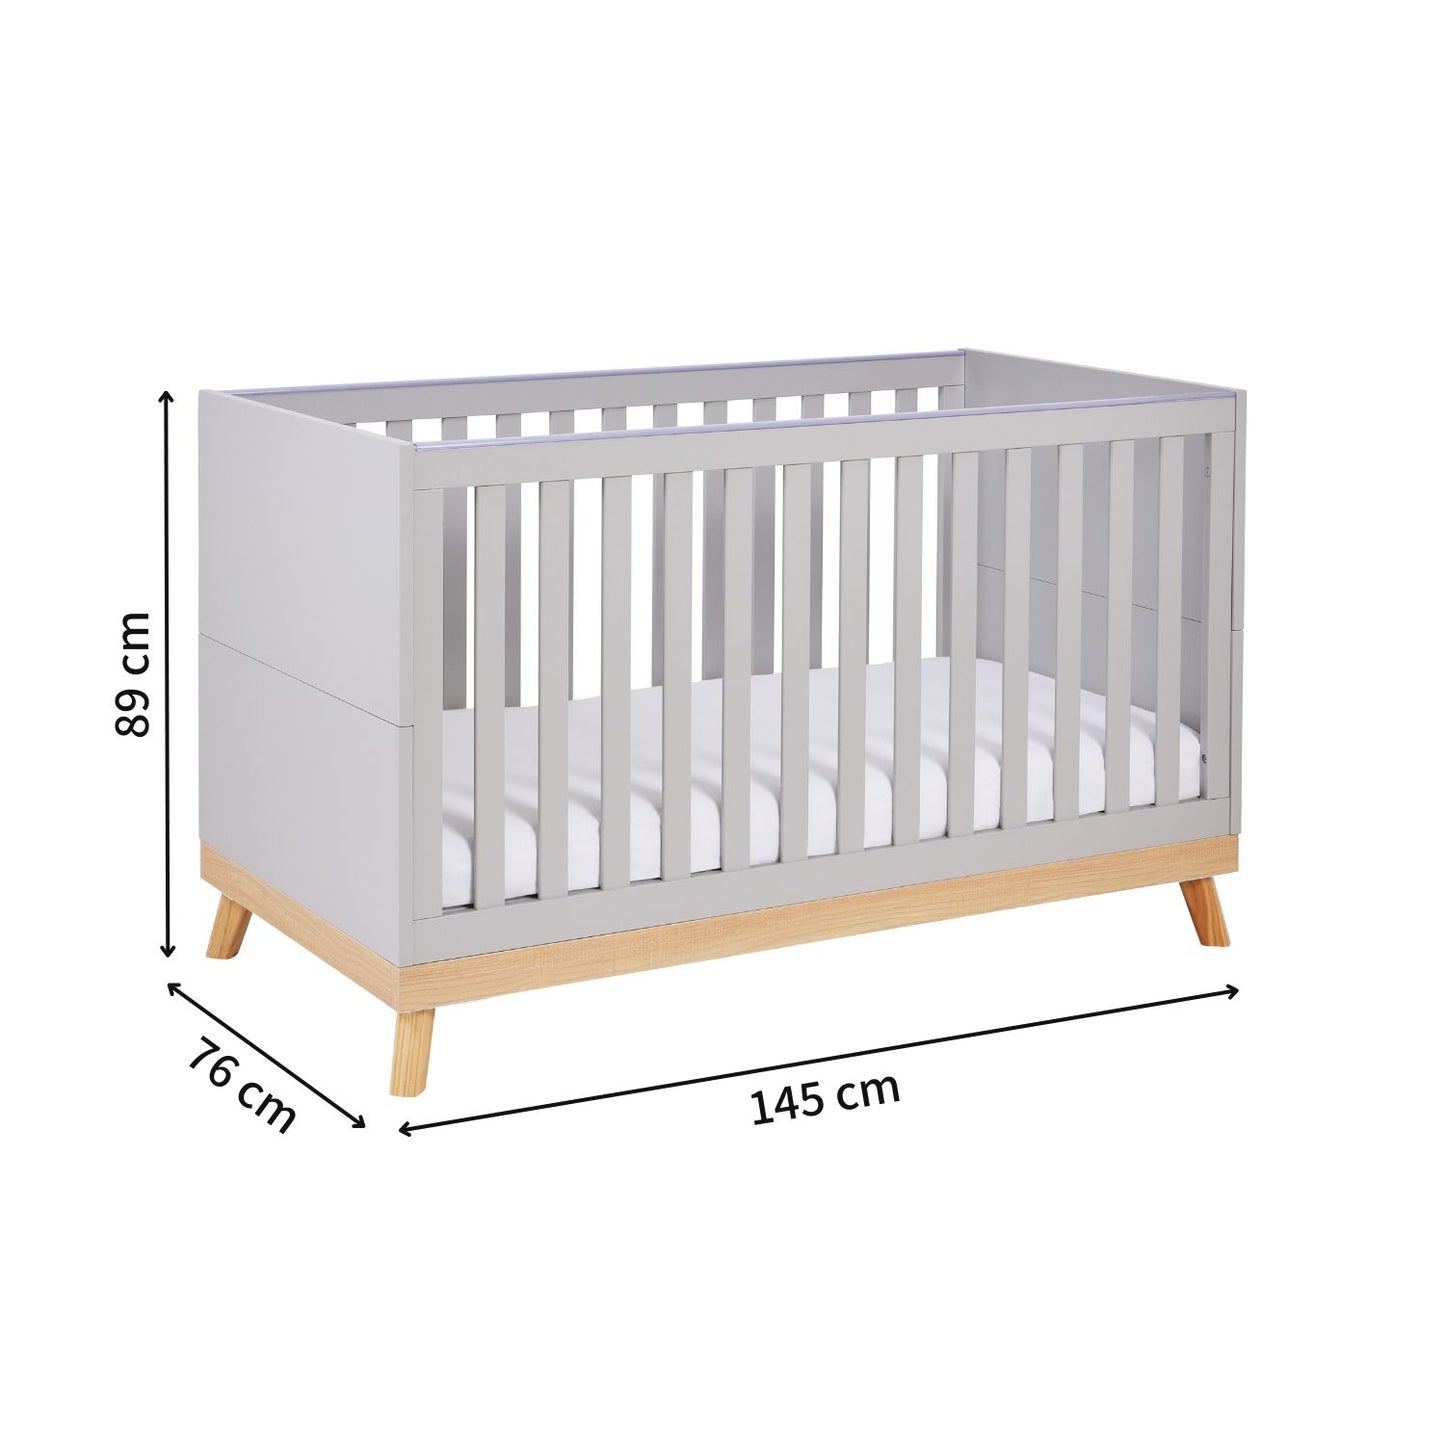 Babymore Mona Cot Bed - Adjustable Base - Teething Rail - 2-in-1 Conversion